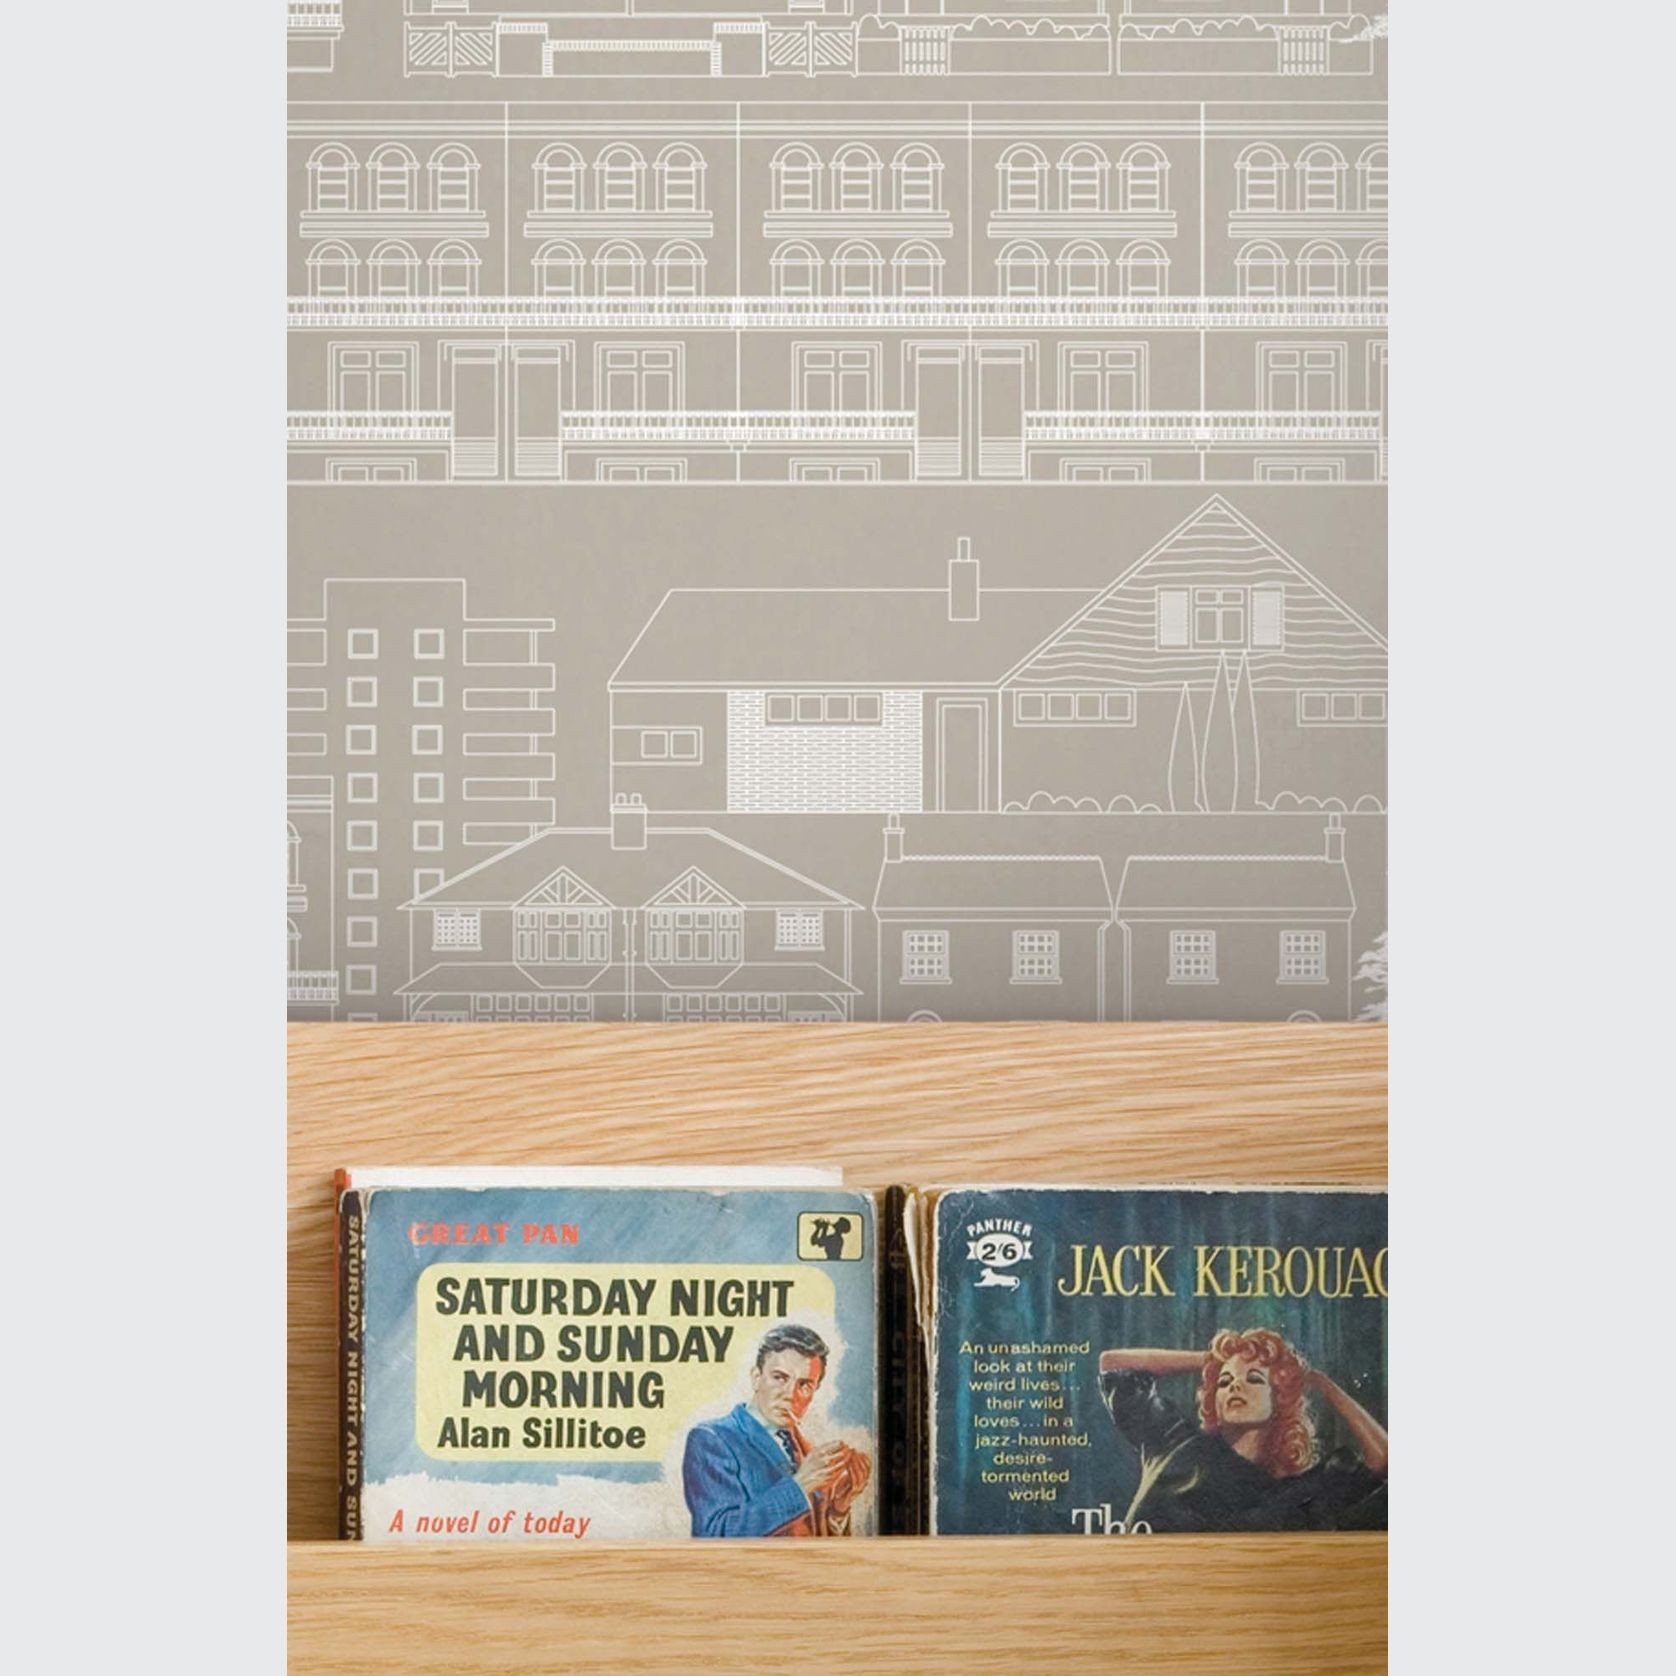 The Family Album by Mini Moderns gallery detail image